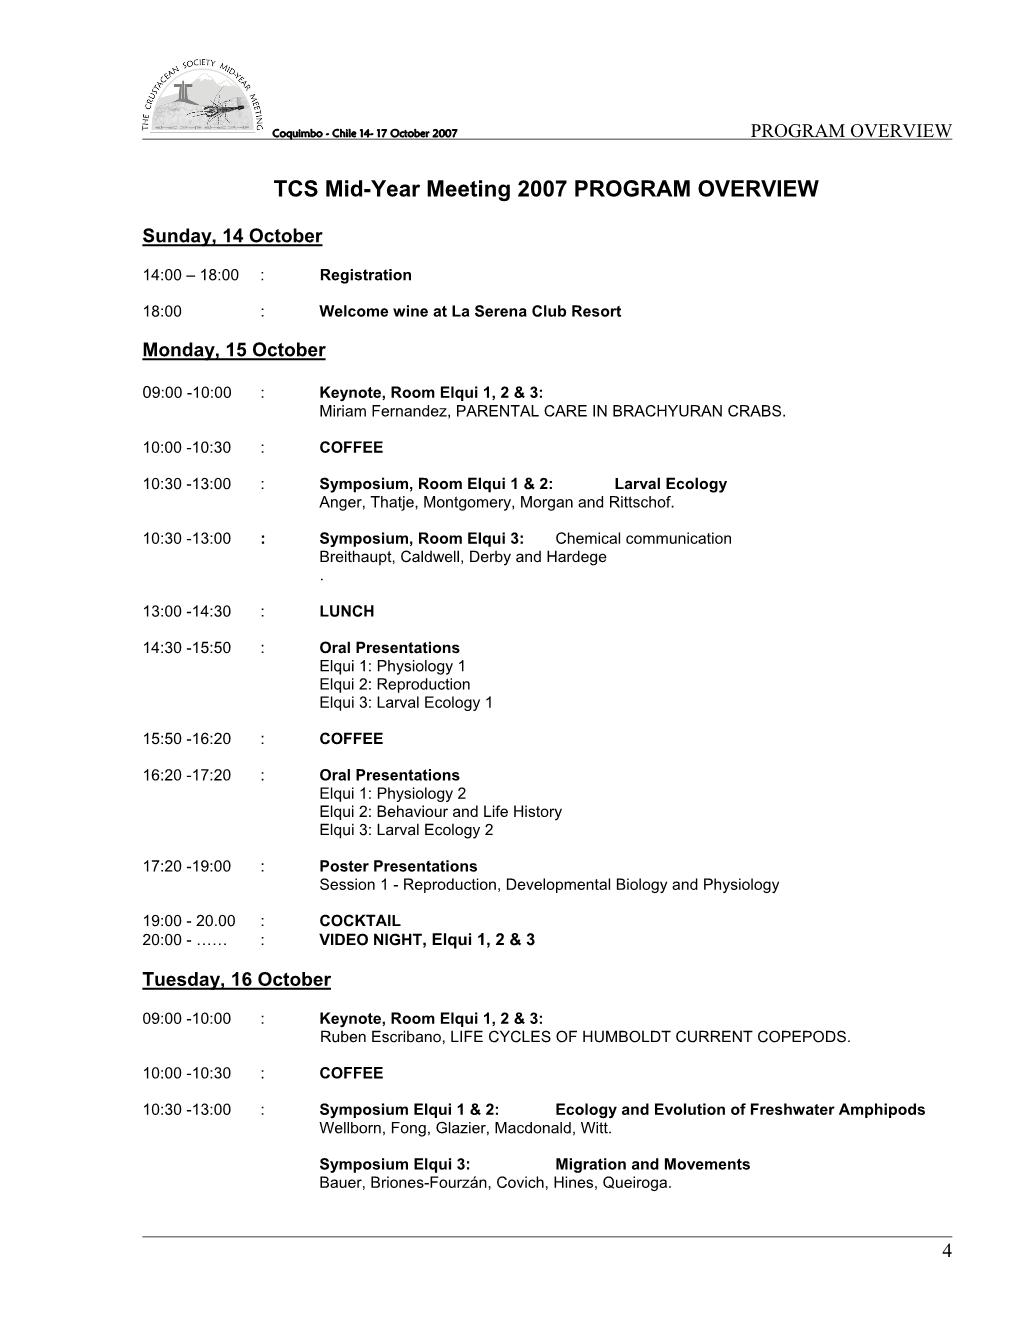 TCS Mid-Year Meeting 2007 PROGRAM OVERVIEW